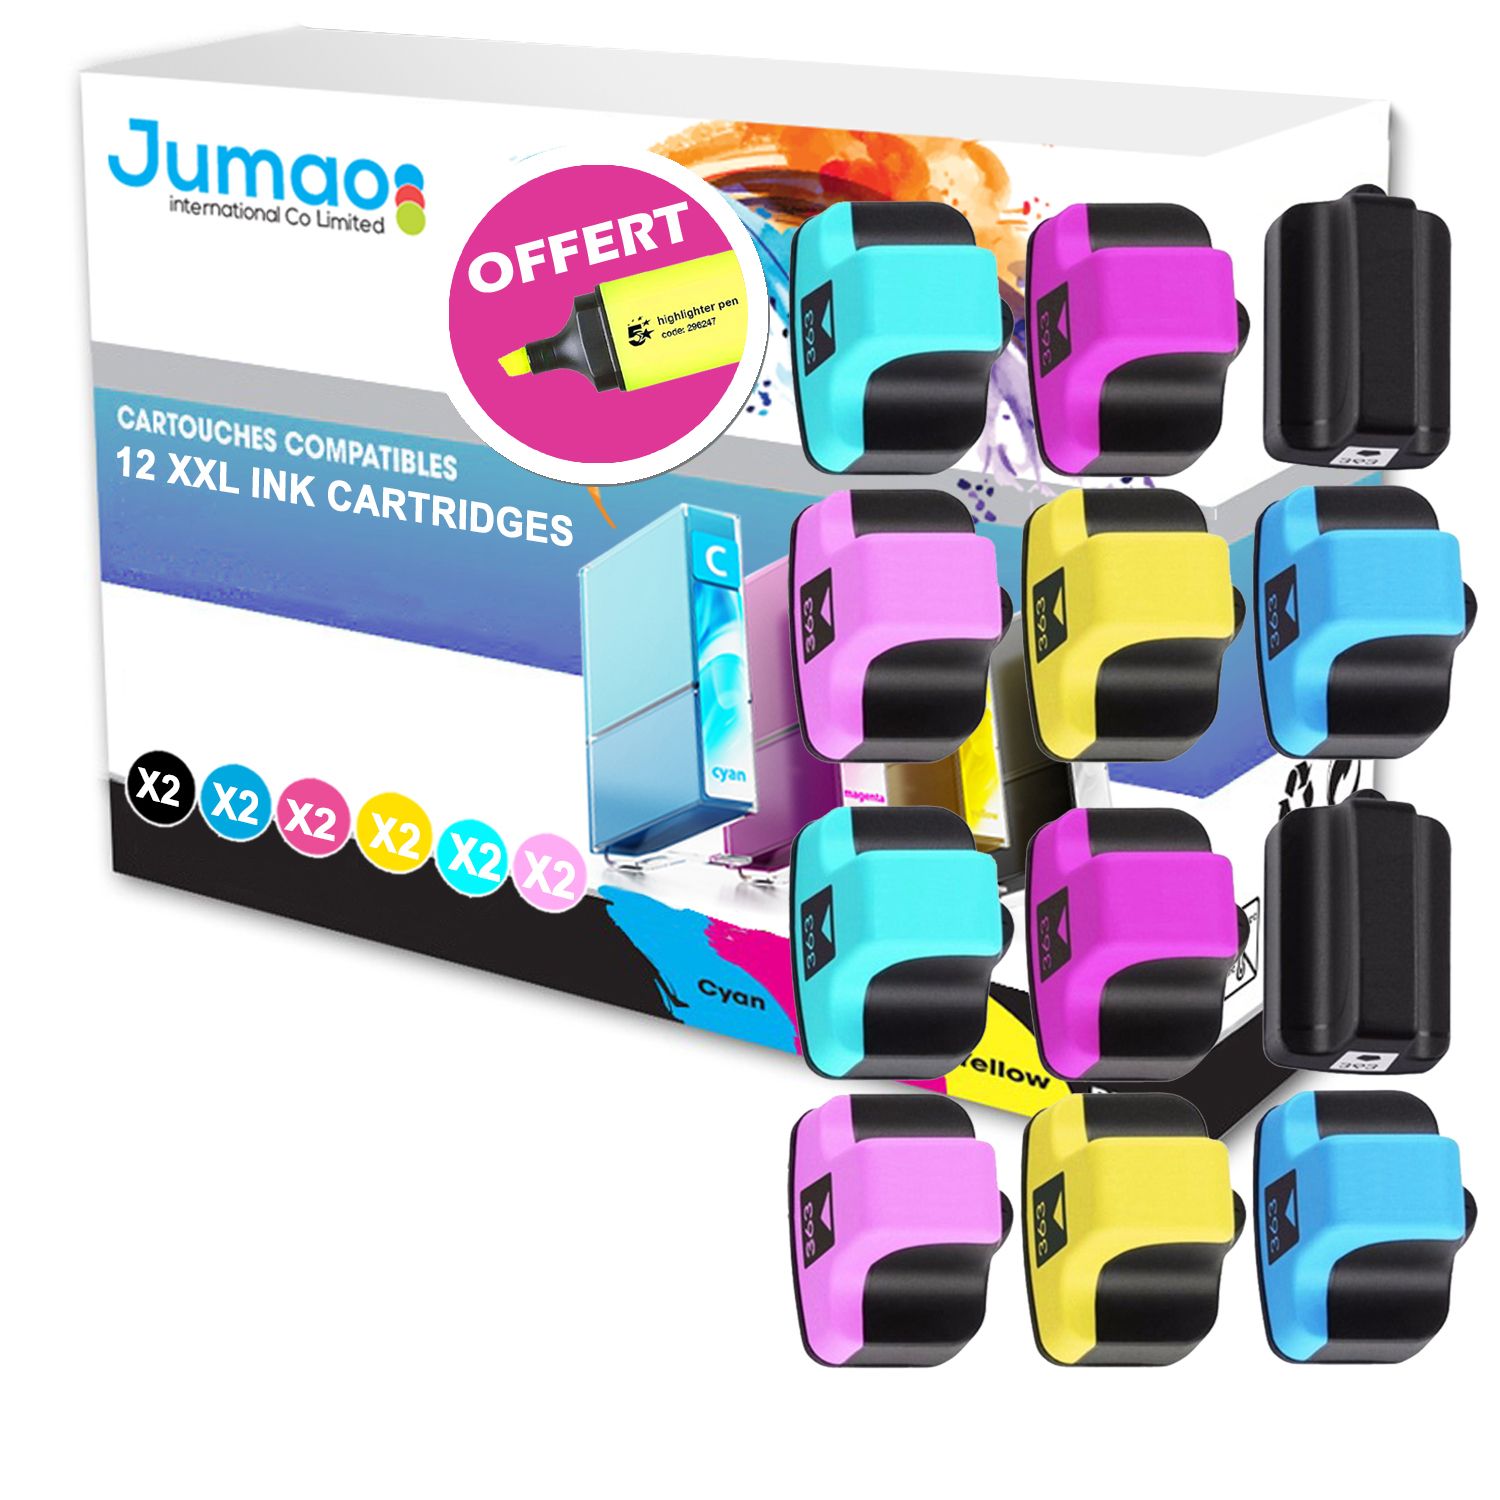 12 cartouches compatibles pour HP Photosmart 3310 All-in-One Printer Type Jumao +Fluo offert